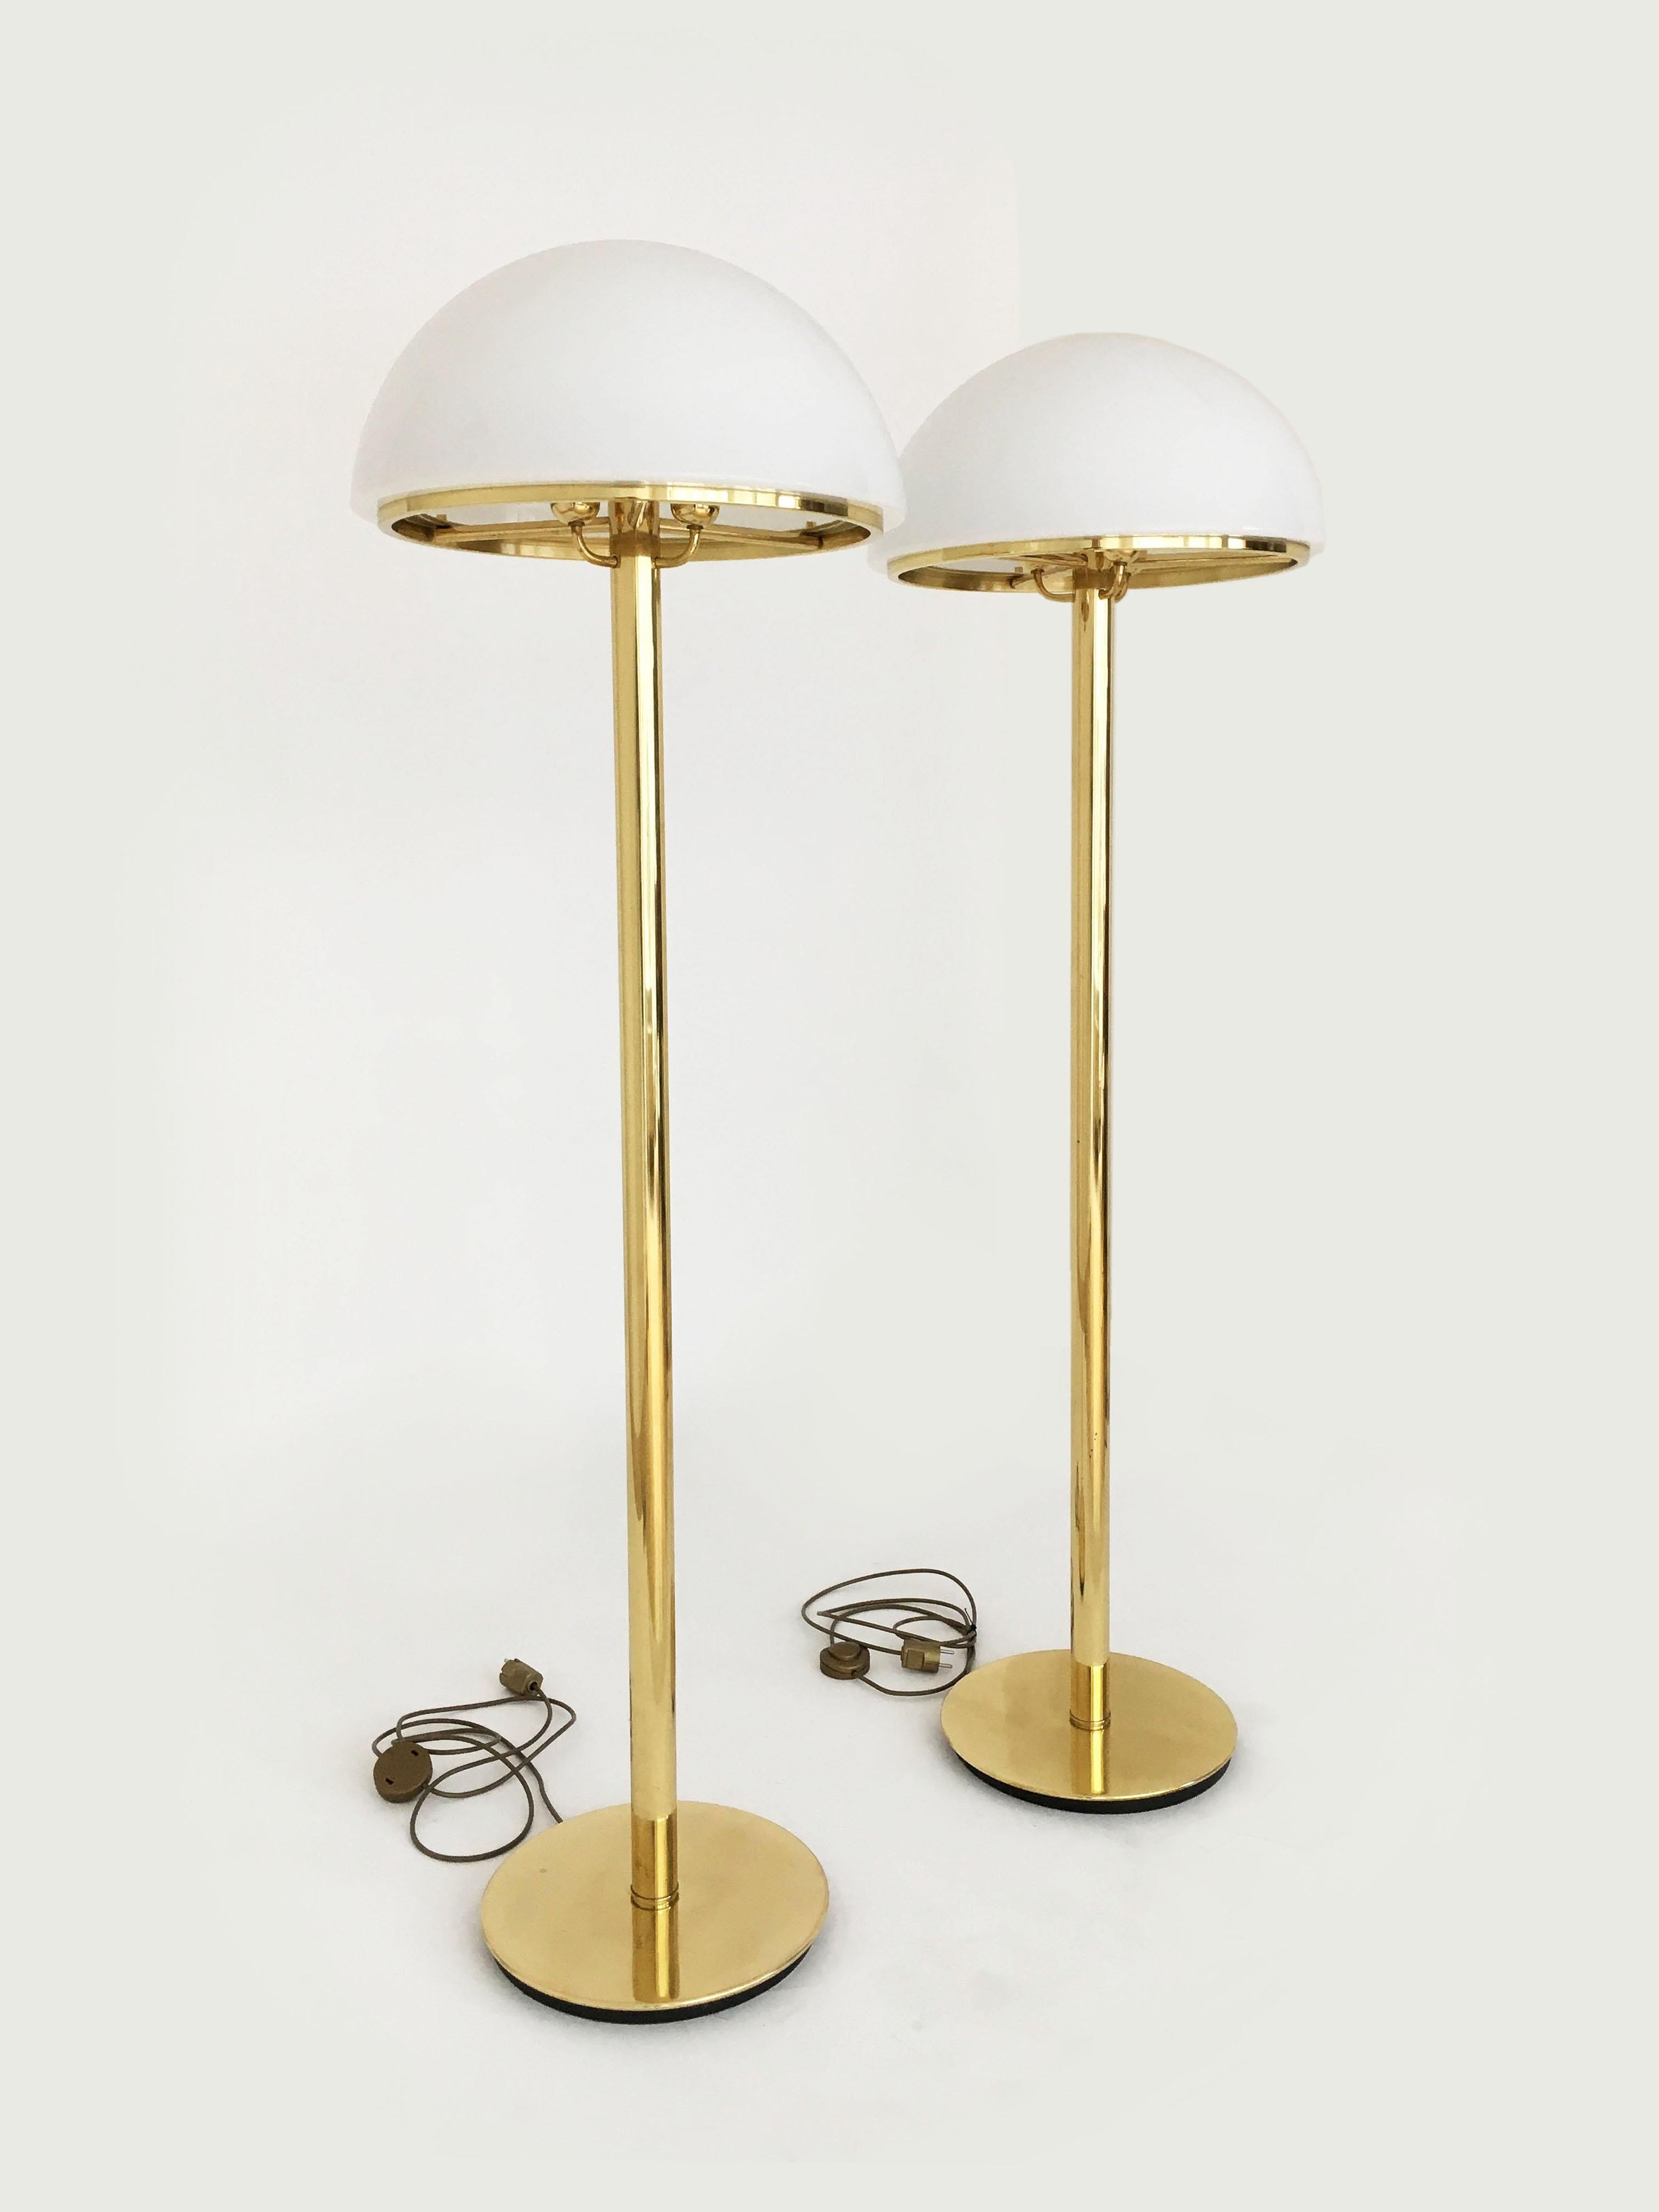 A pair of impressive sized Glashütte Limburg mushroom floor lamps in brass with satin glass shade, Germany, 1970s. In the style of Karl Springer. As expected from a German manufactory, Glashütte Limburg, the lamps are superbly build quality - heavy